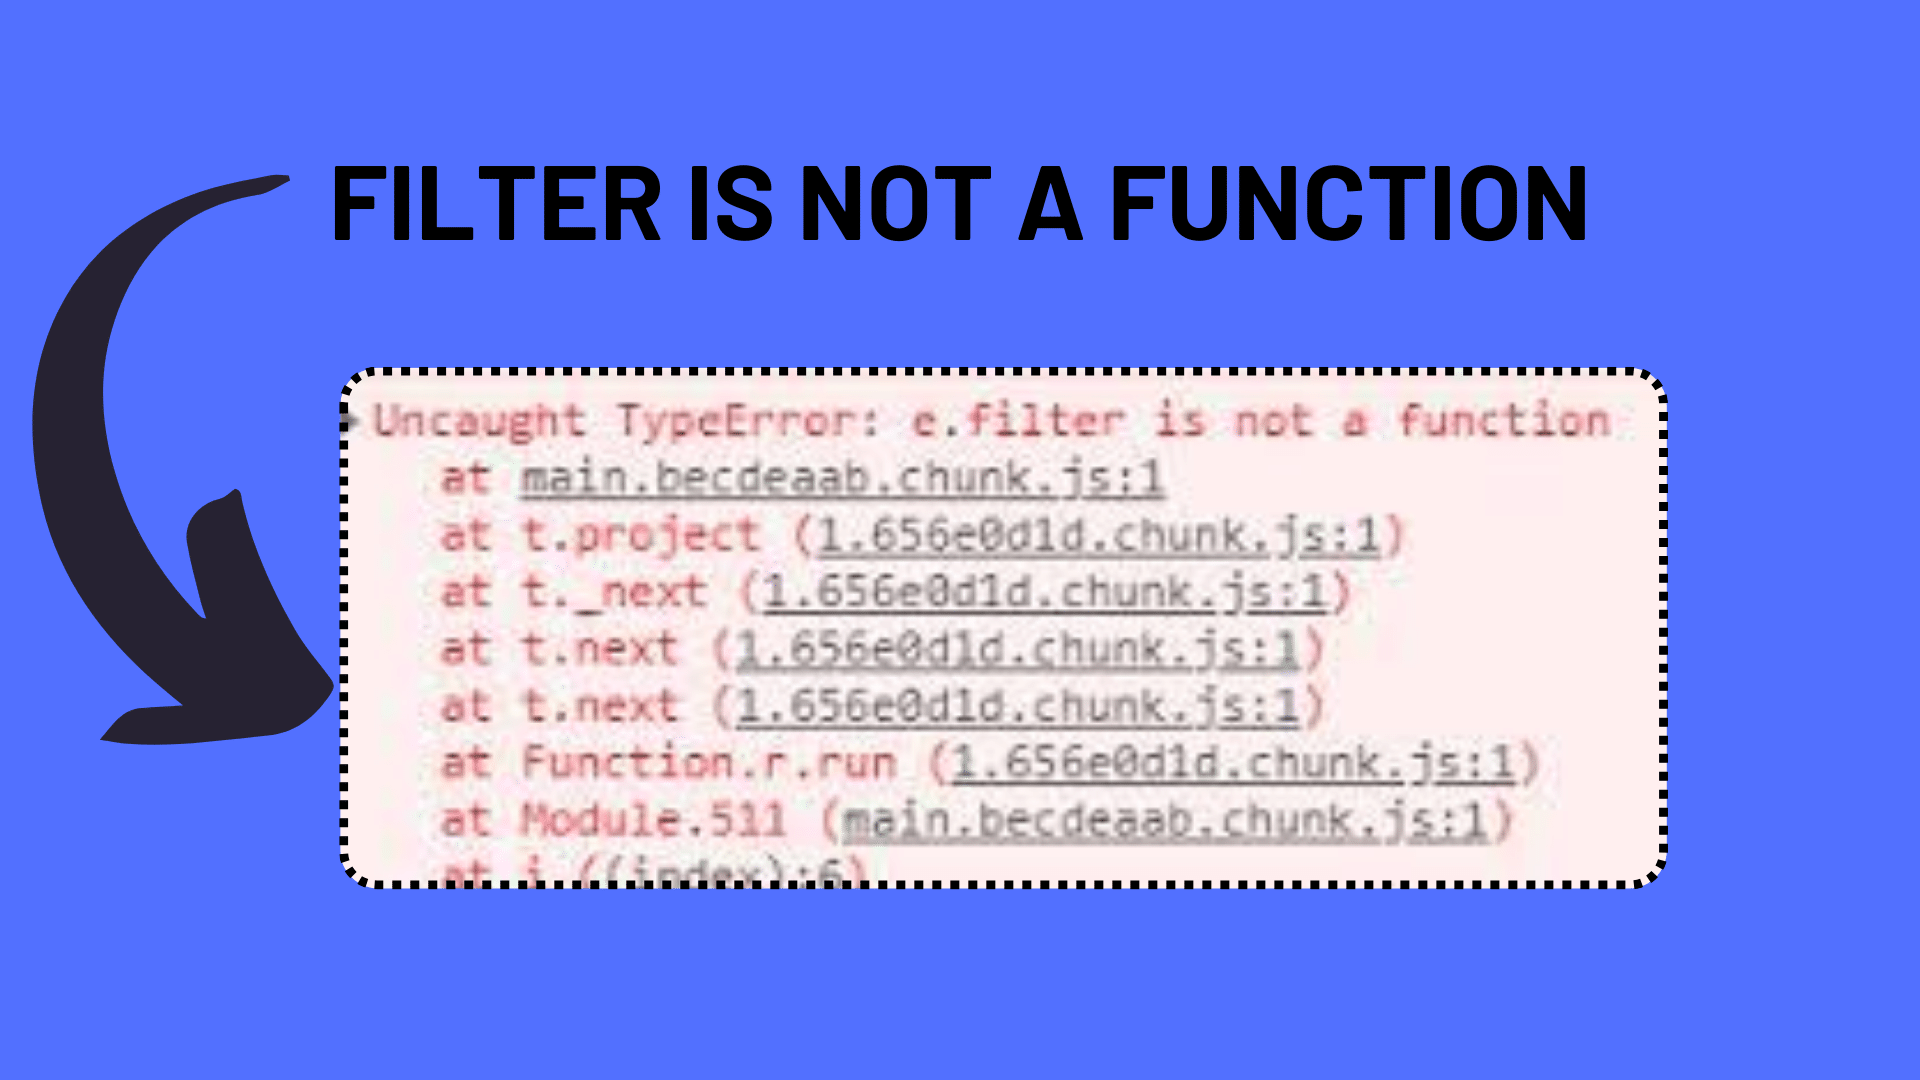 Filter is not a function